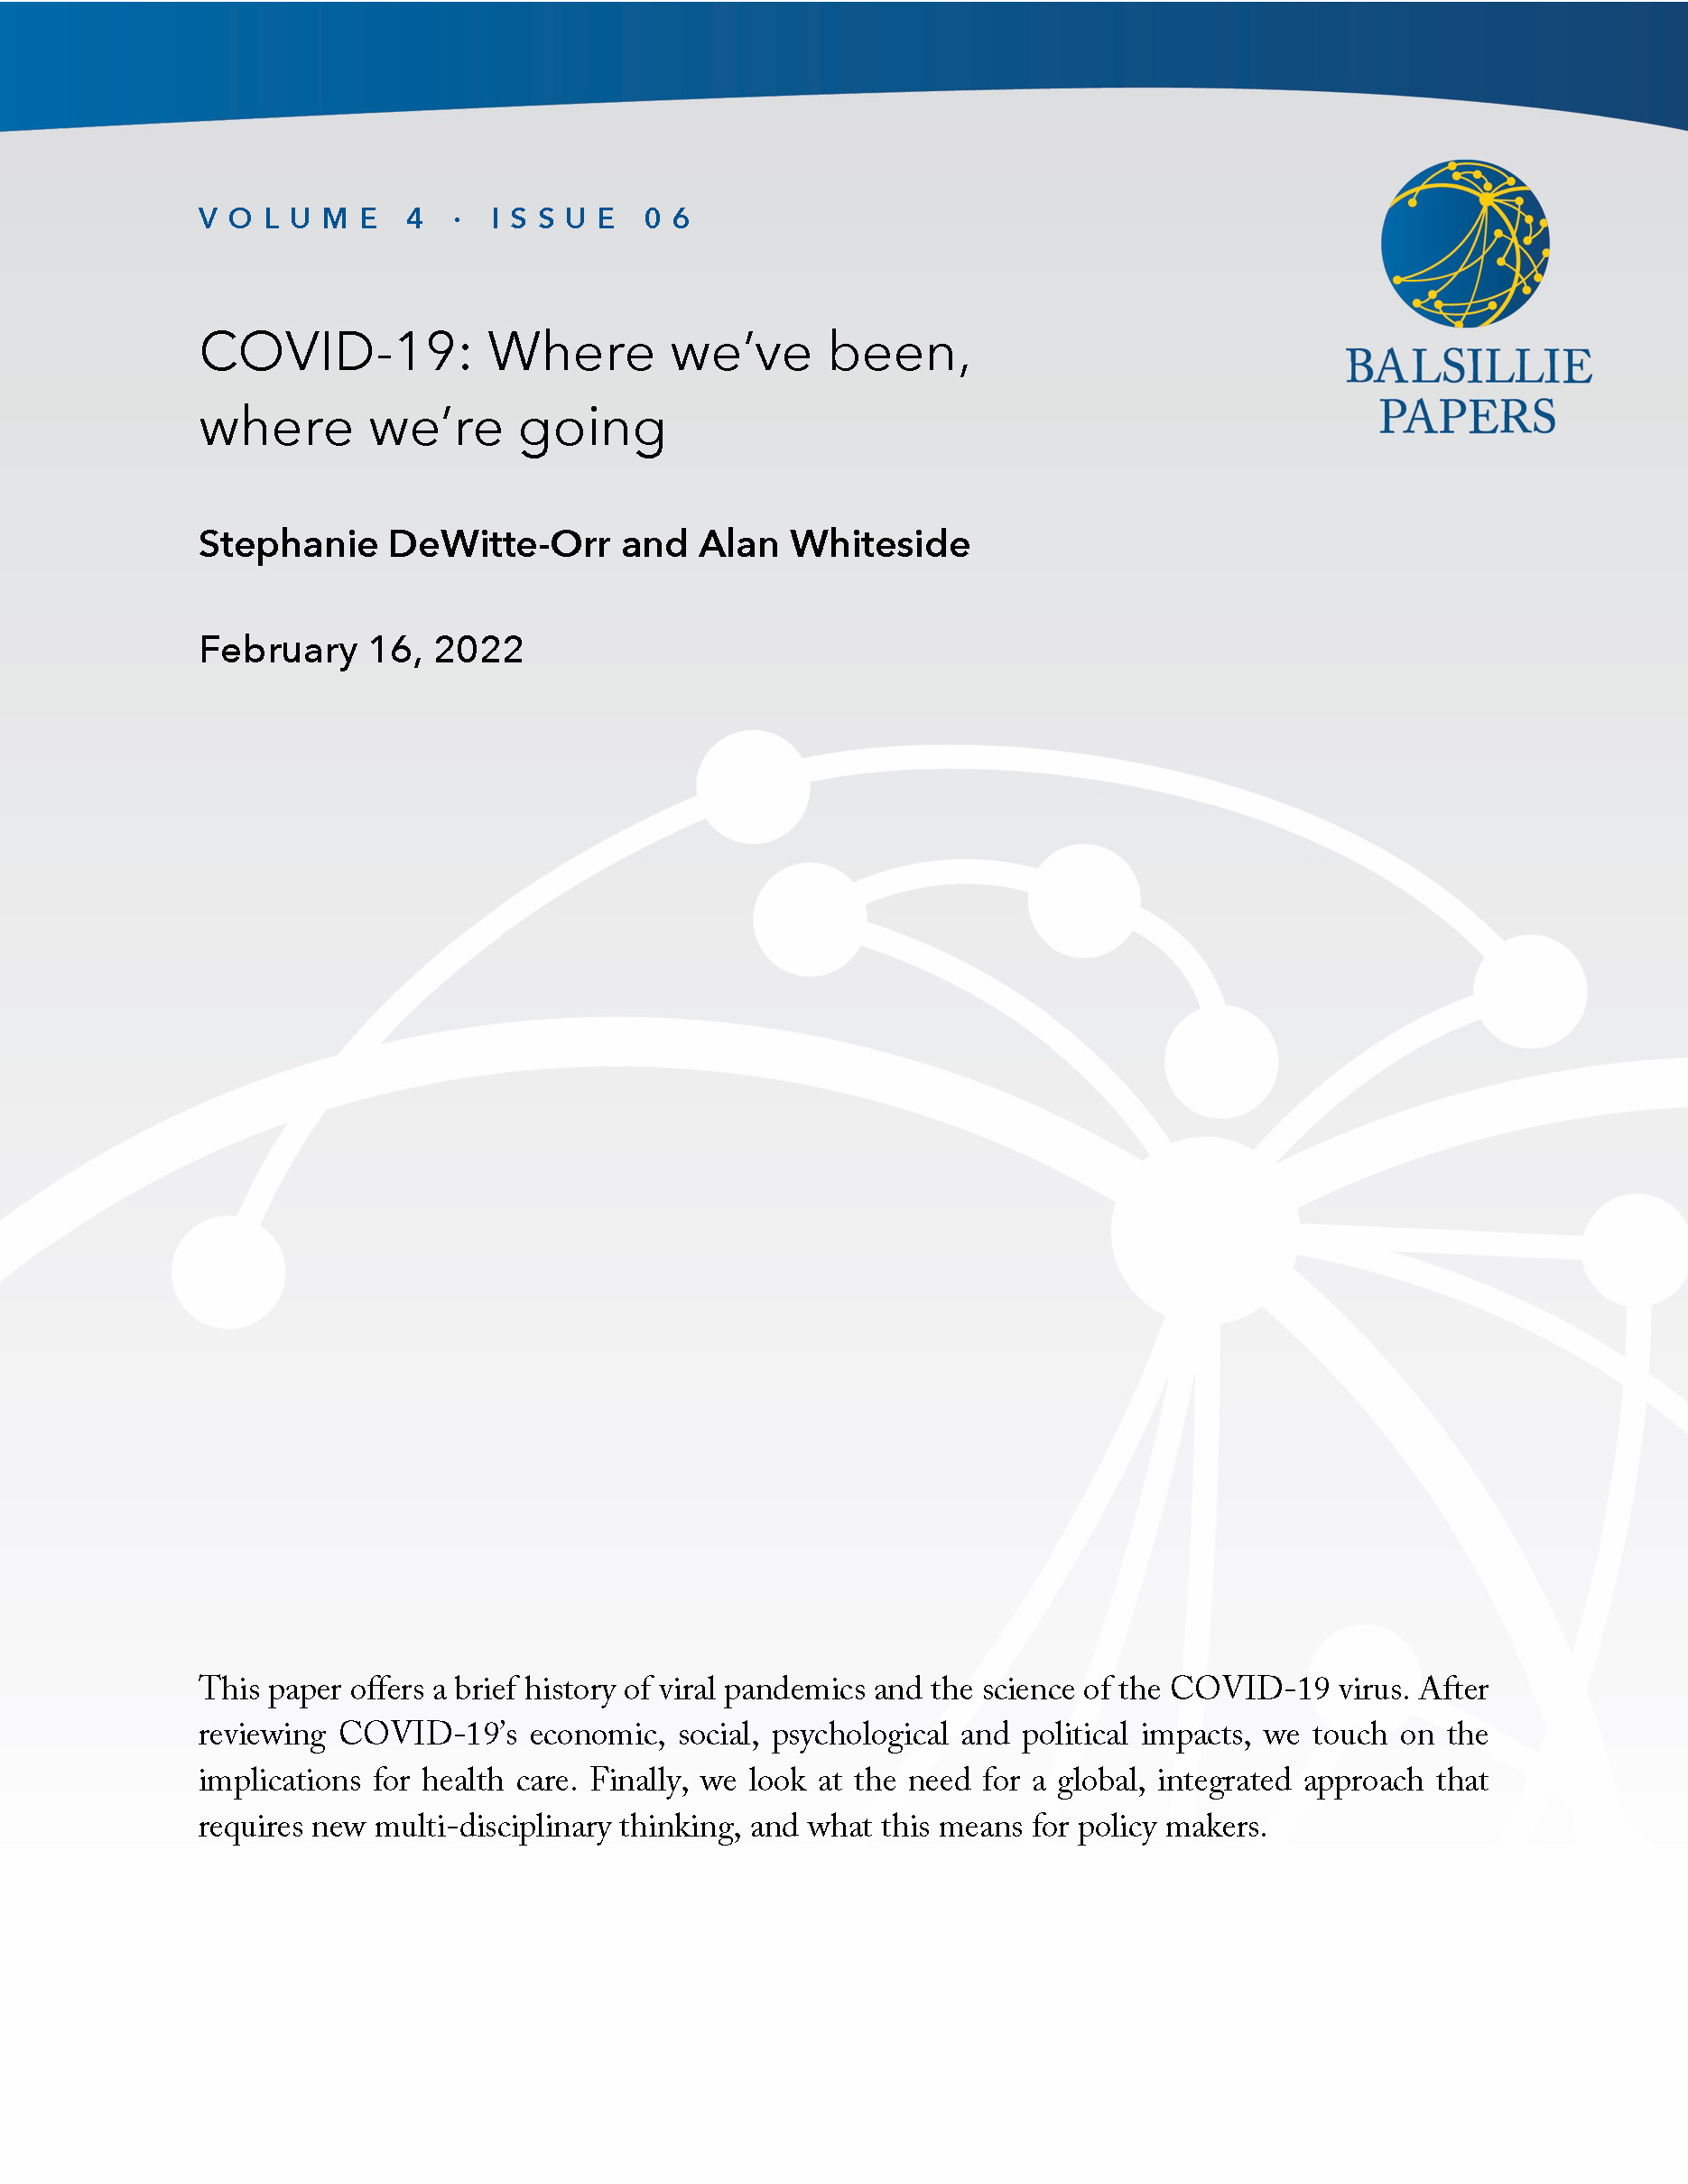 Balsillie Paper - DeWitte-Orr and Whiteside COVER